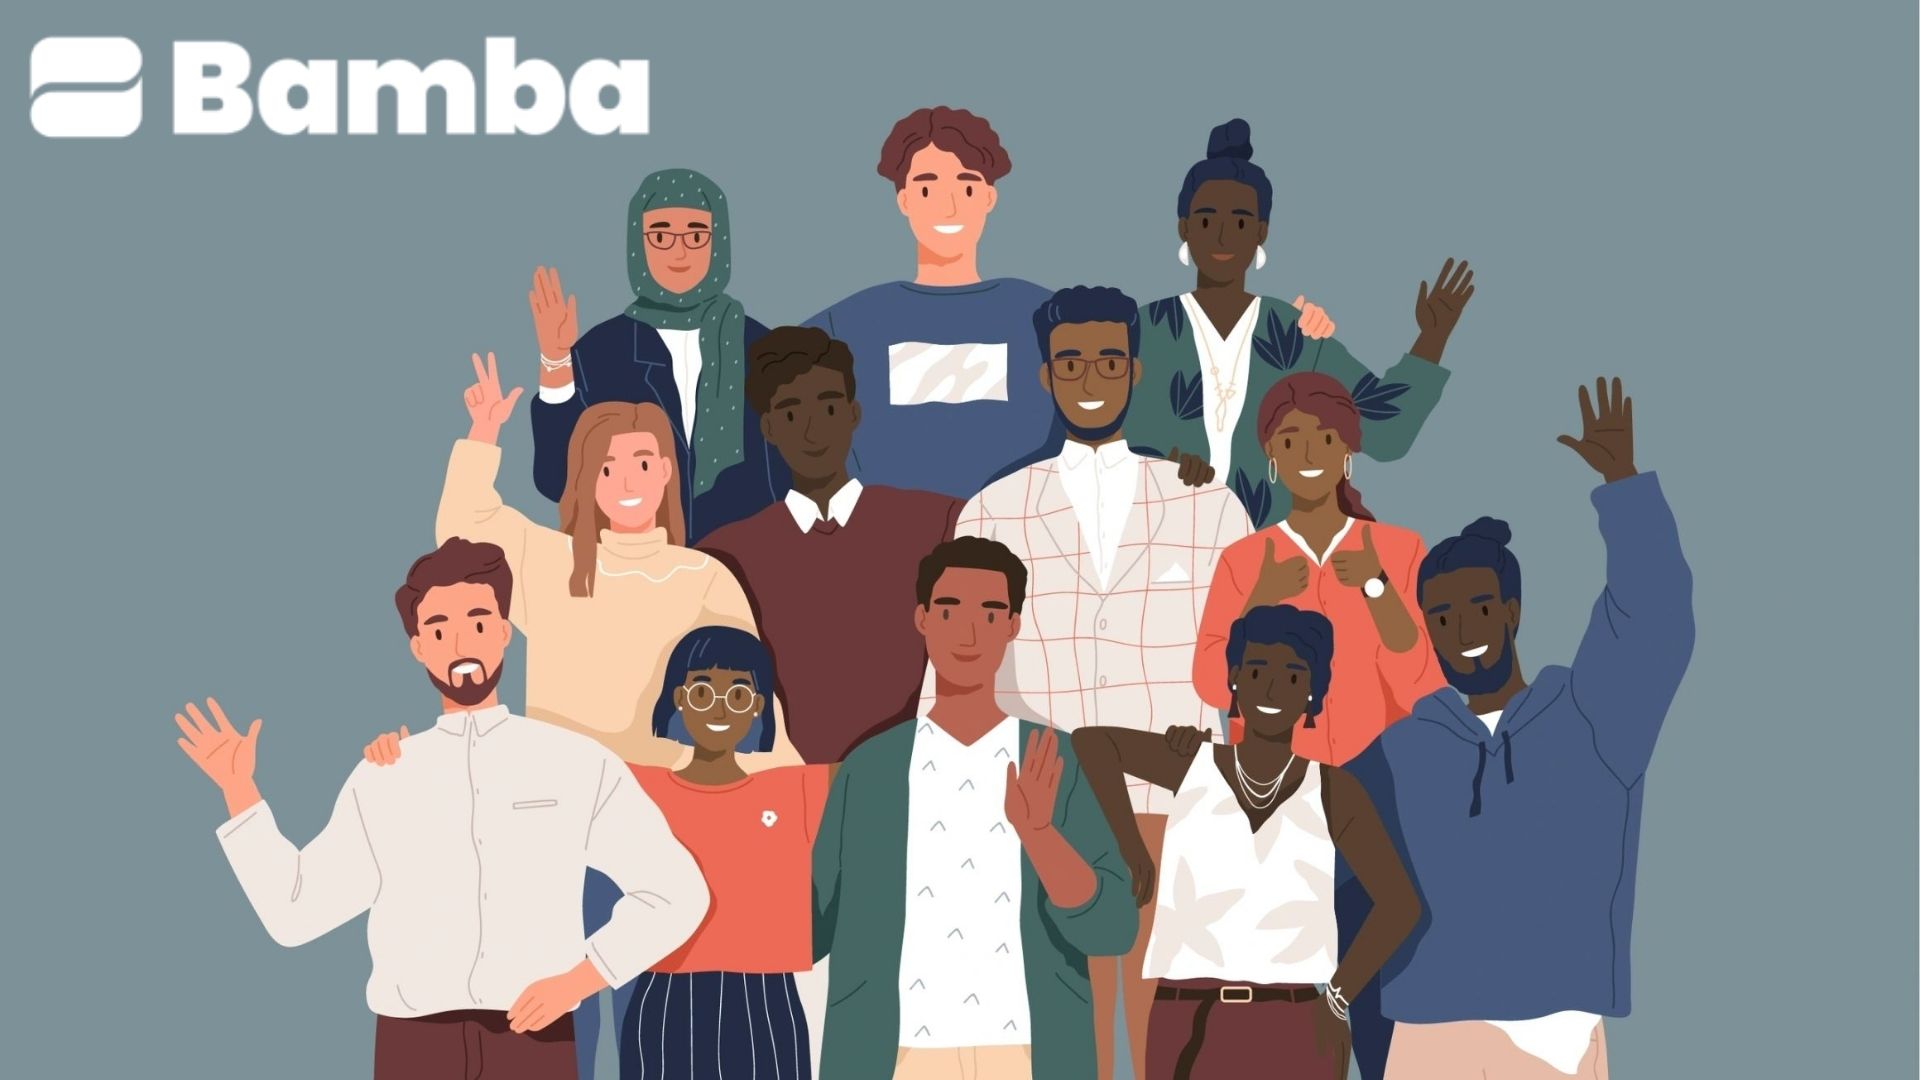 Bamba raises $3.2M seed round to scale its app for micro-merchants in Africa